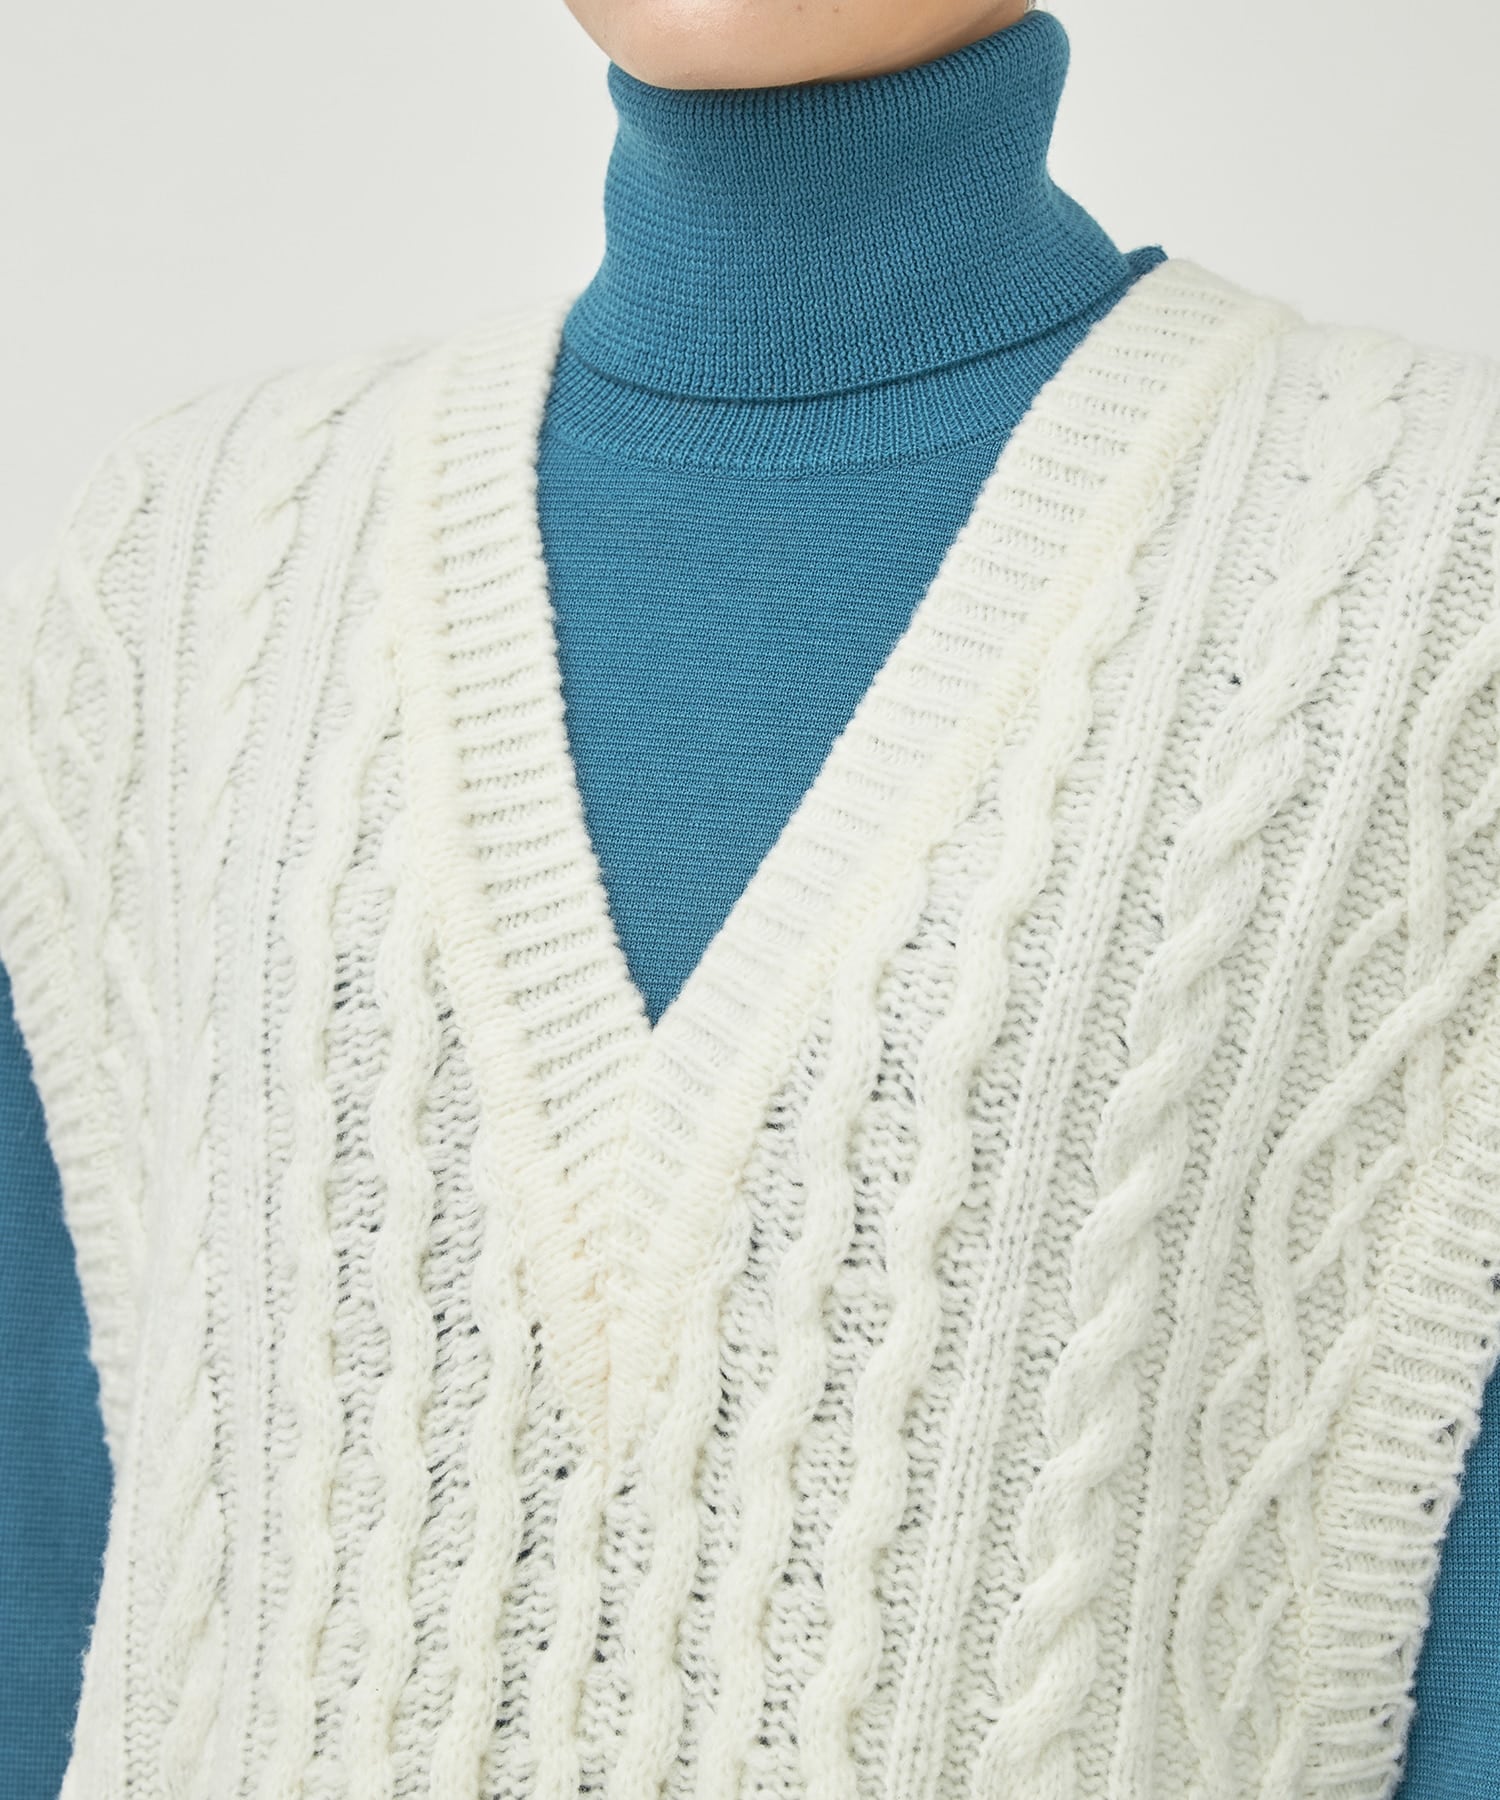 Vintage processing cable knit vest WRAPINKNOT